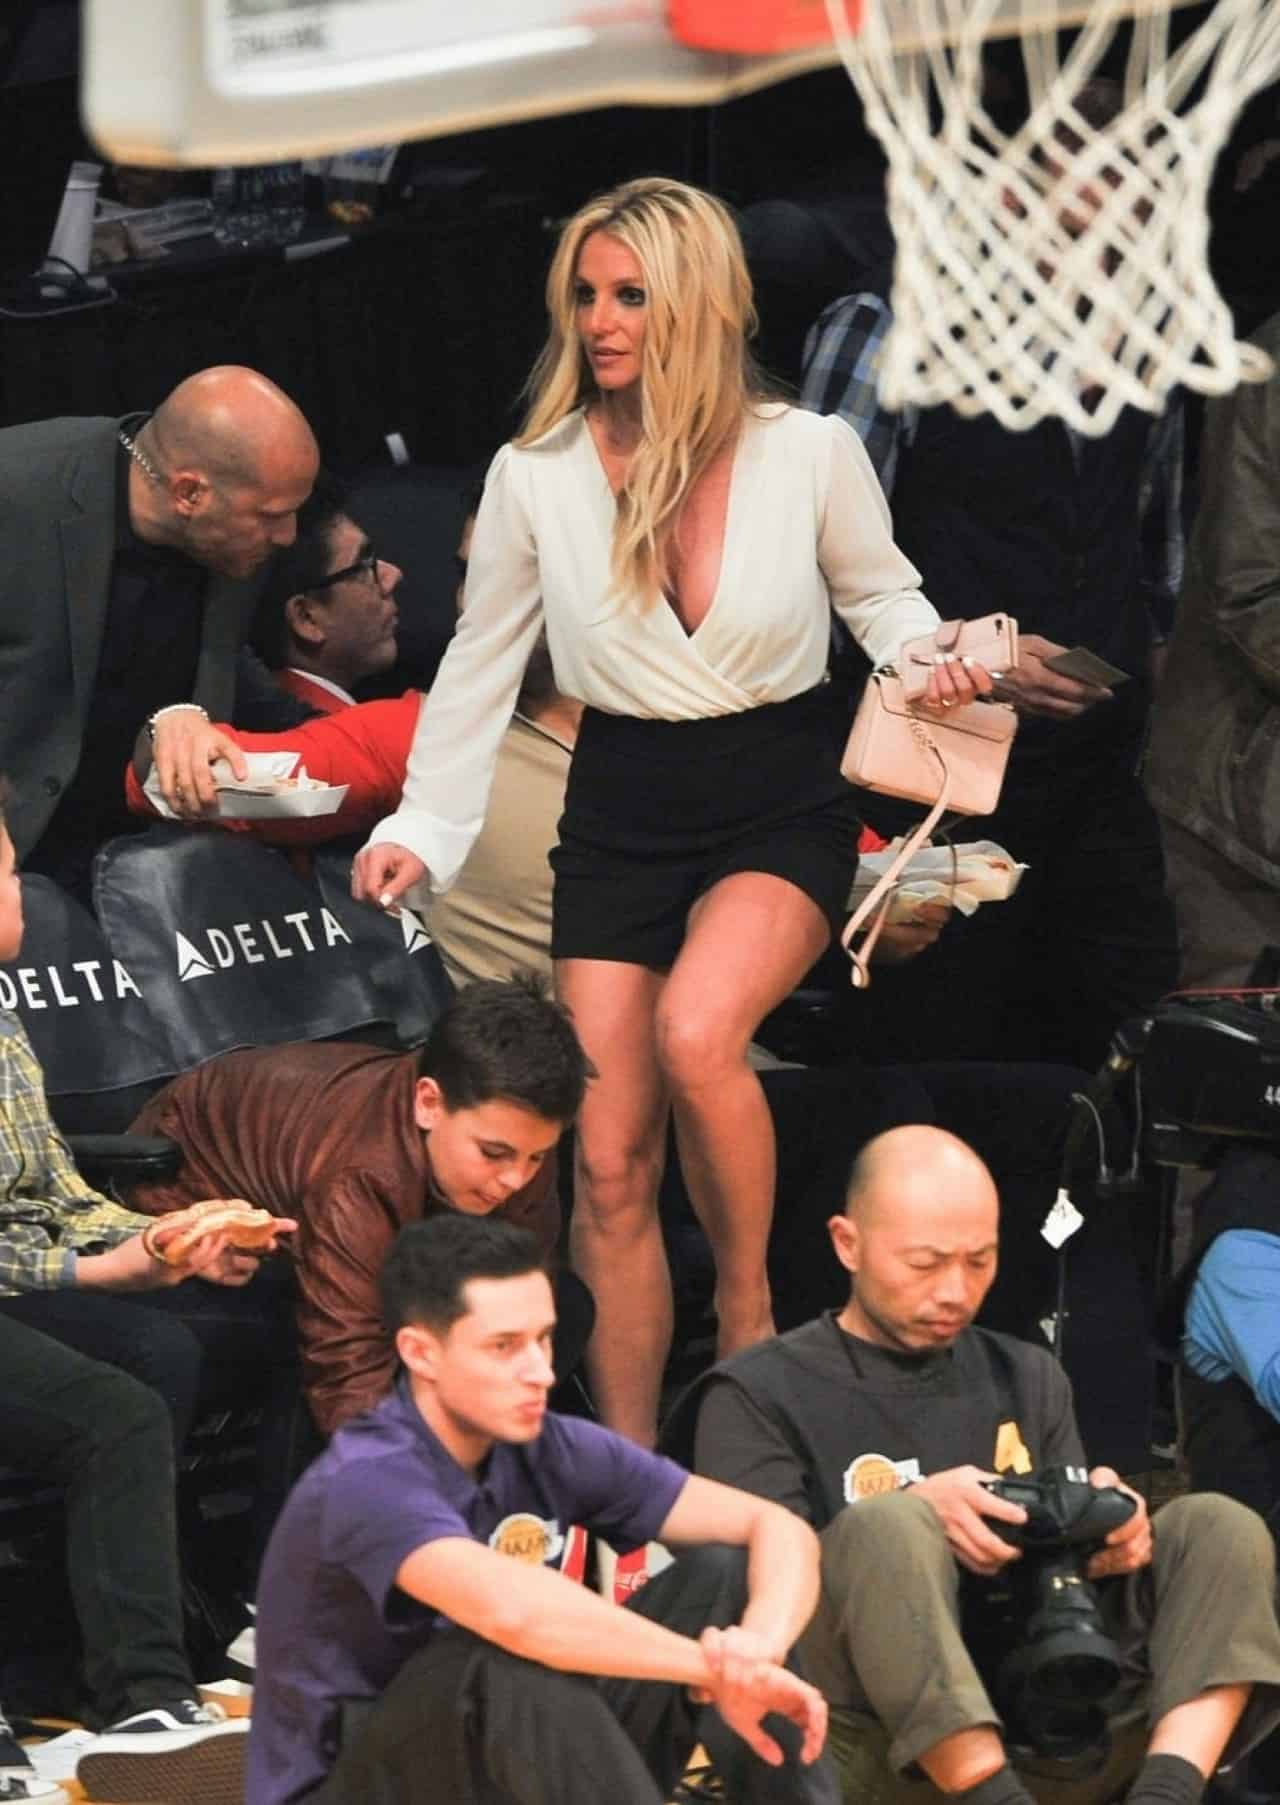 Britney Spears in Skintight Shorts and Sky-High Stilettos at Lakers Game